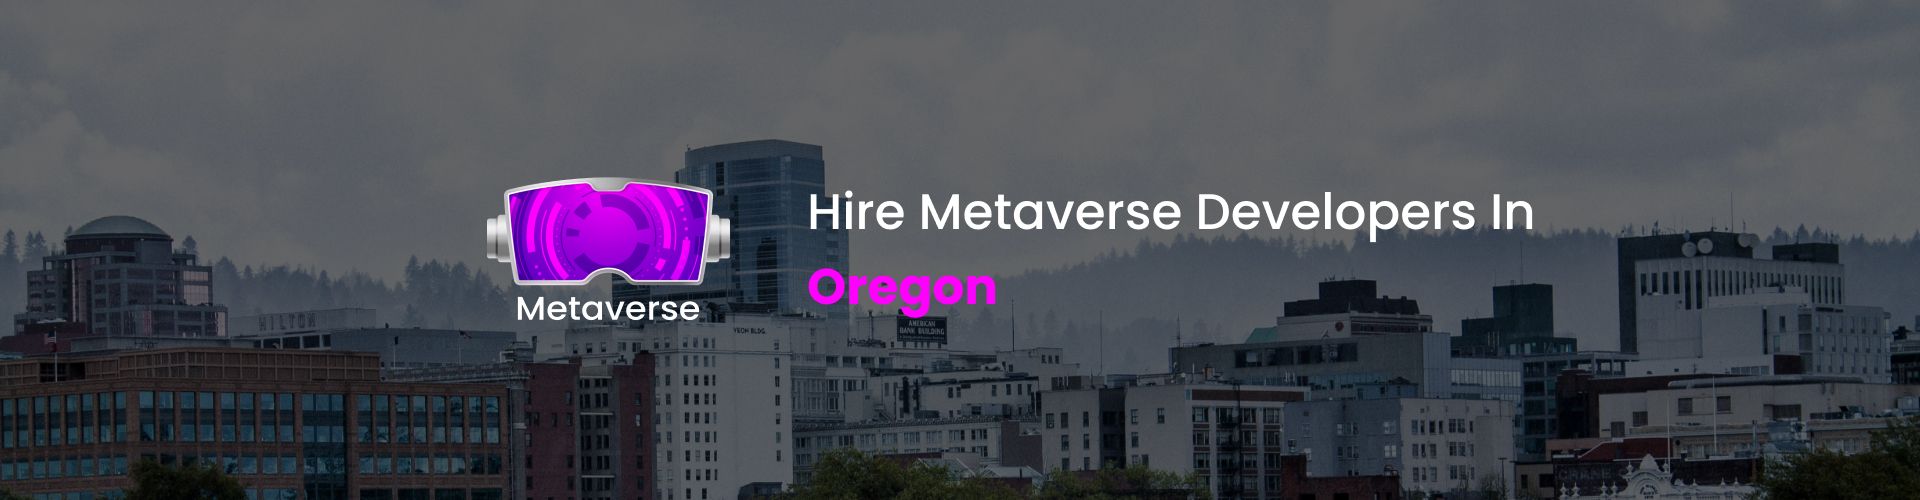 hire metaverse developers in oregon